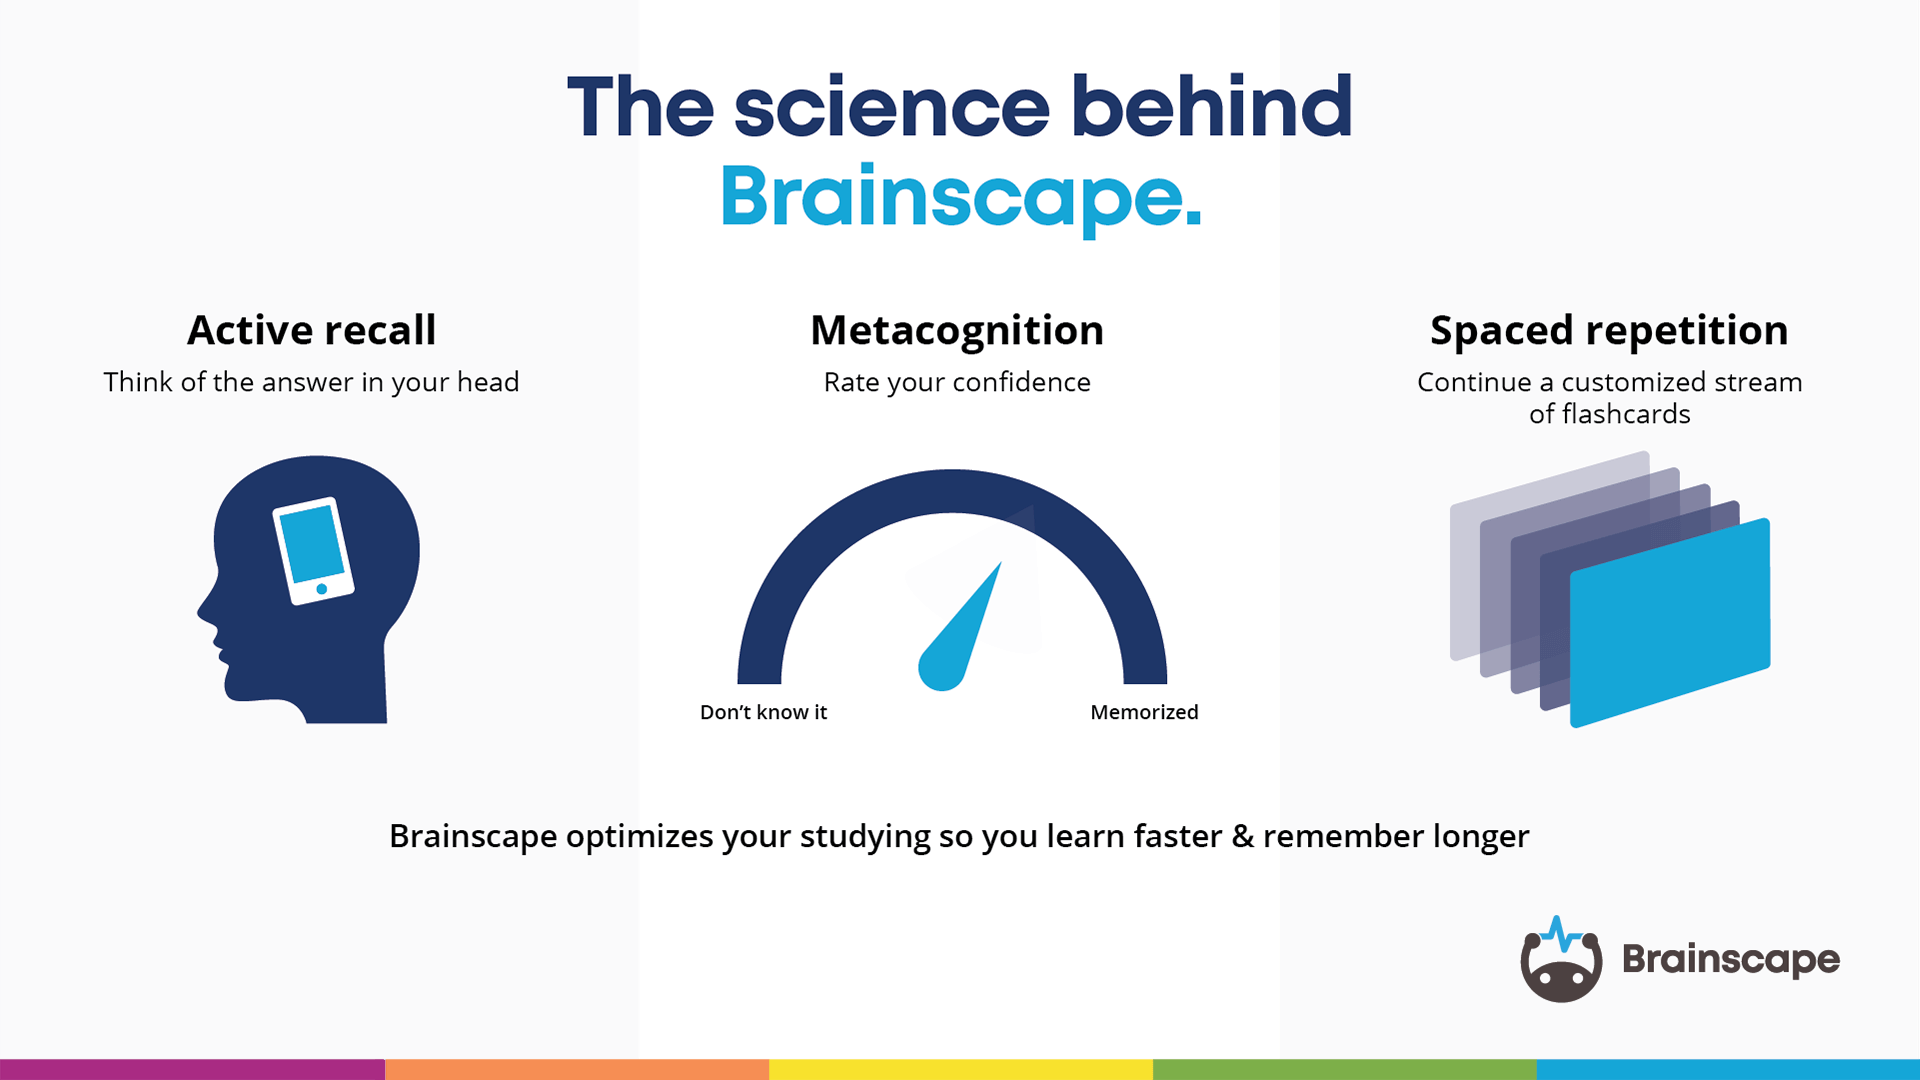 The science behind brainscape: active recall, metacognition, and spaced repetition